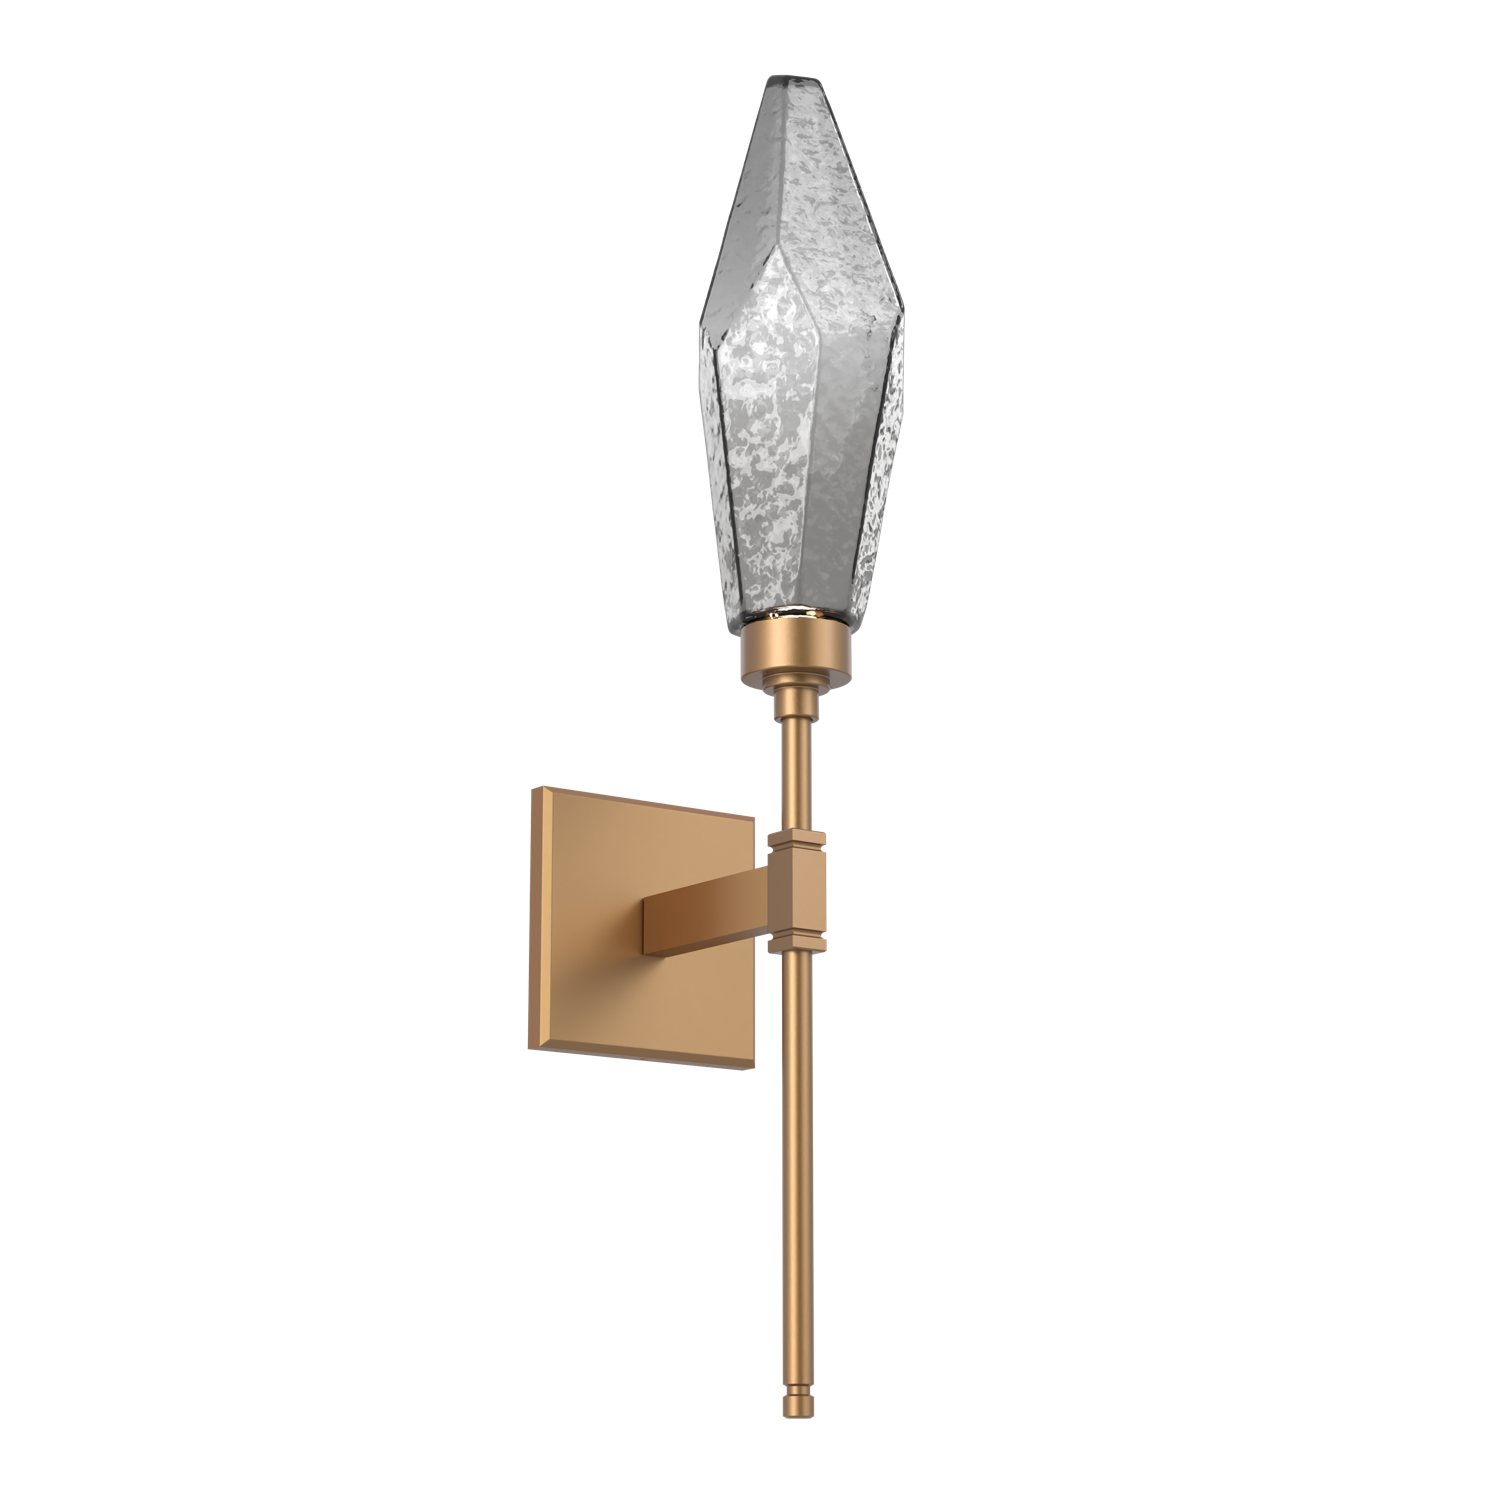 IDB0050-07-NB-CS-Hammerton-Studio-Rock-Crystal-belvedere-wall-sconce-with-novel-brass-finish-and-chilled-smoke-glass-shades-and-LED-lamping